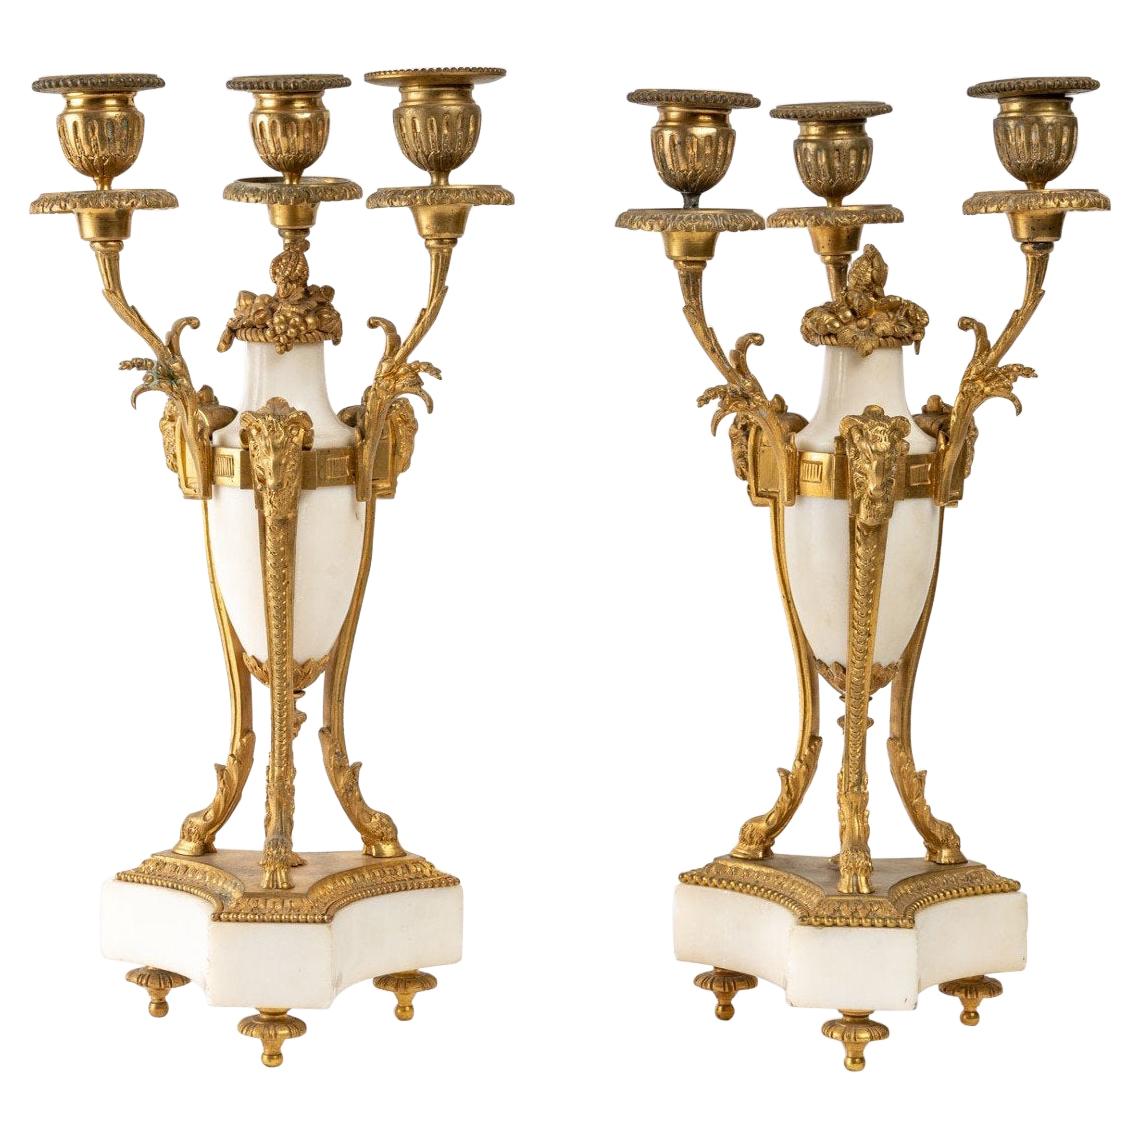 Pair of Candelabras in Gilt Bronze and White Marble